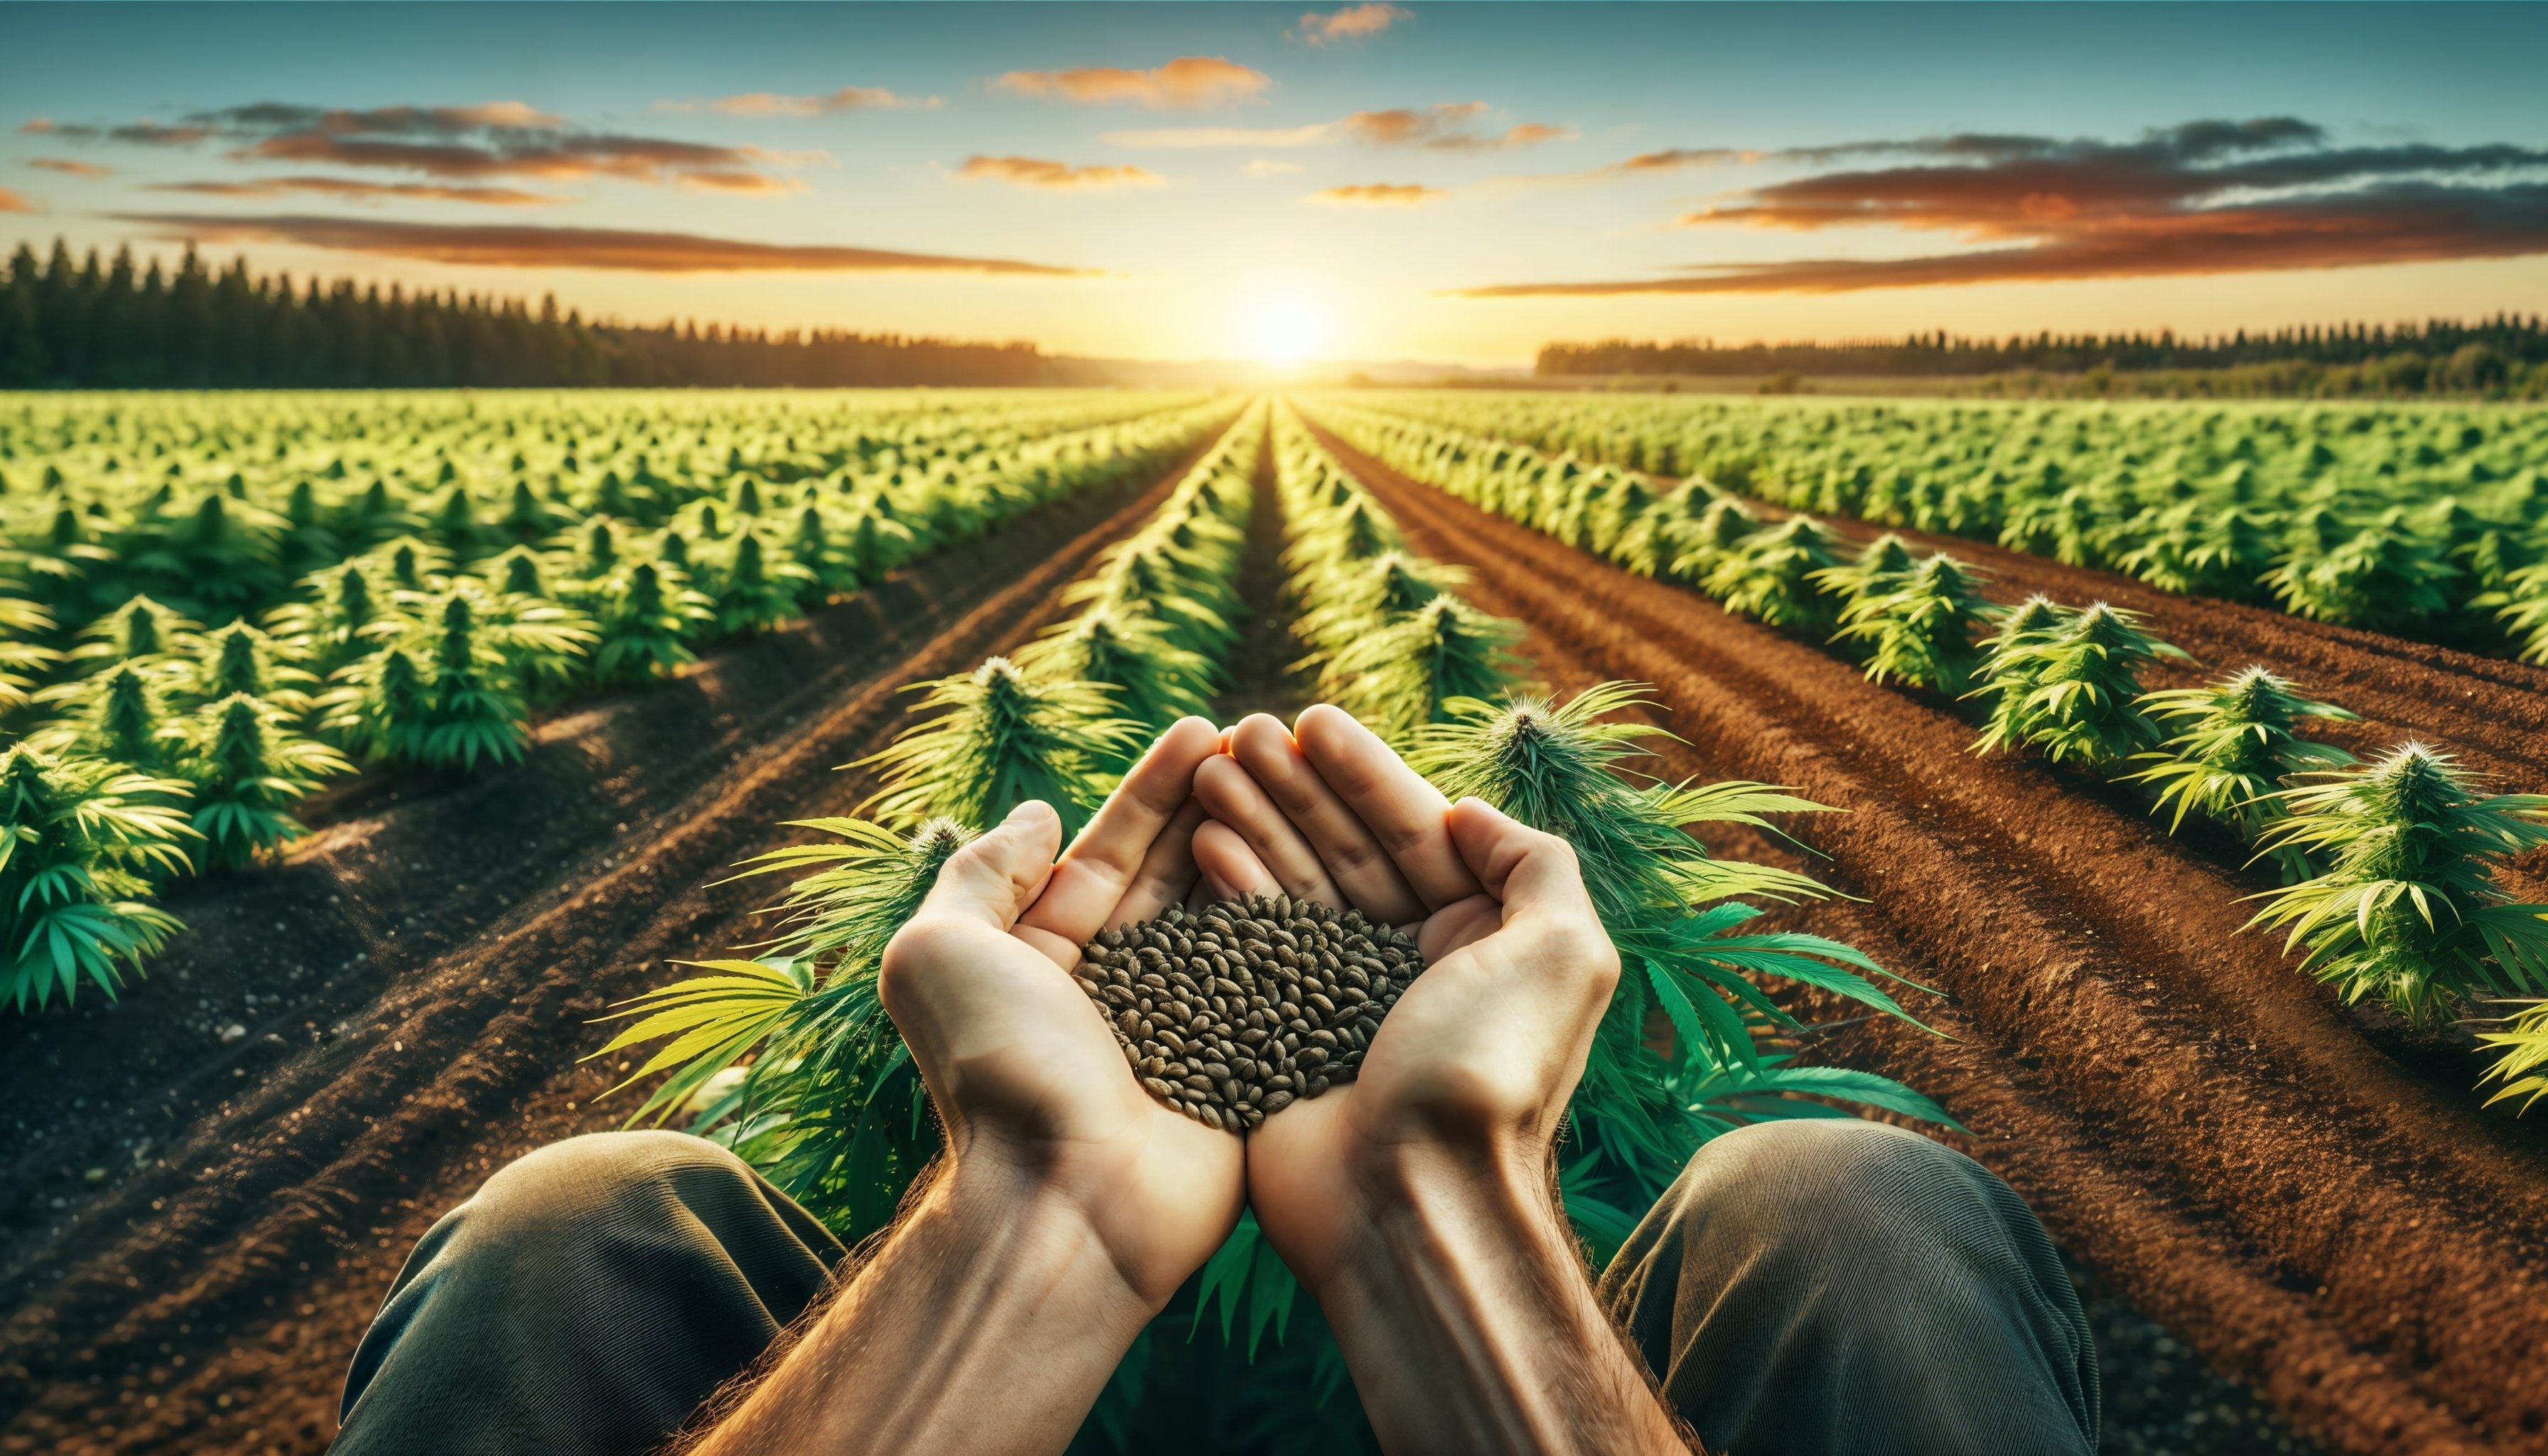 The future of hemp will be interesting to watch. Even with the regional conservation partnership program trying to help provide solutions, only time will tell the future of farming.